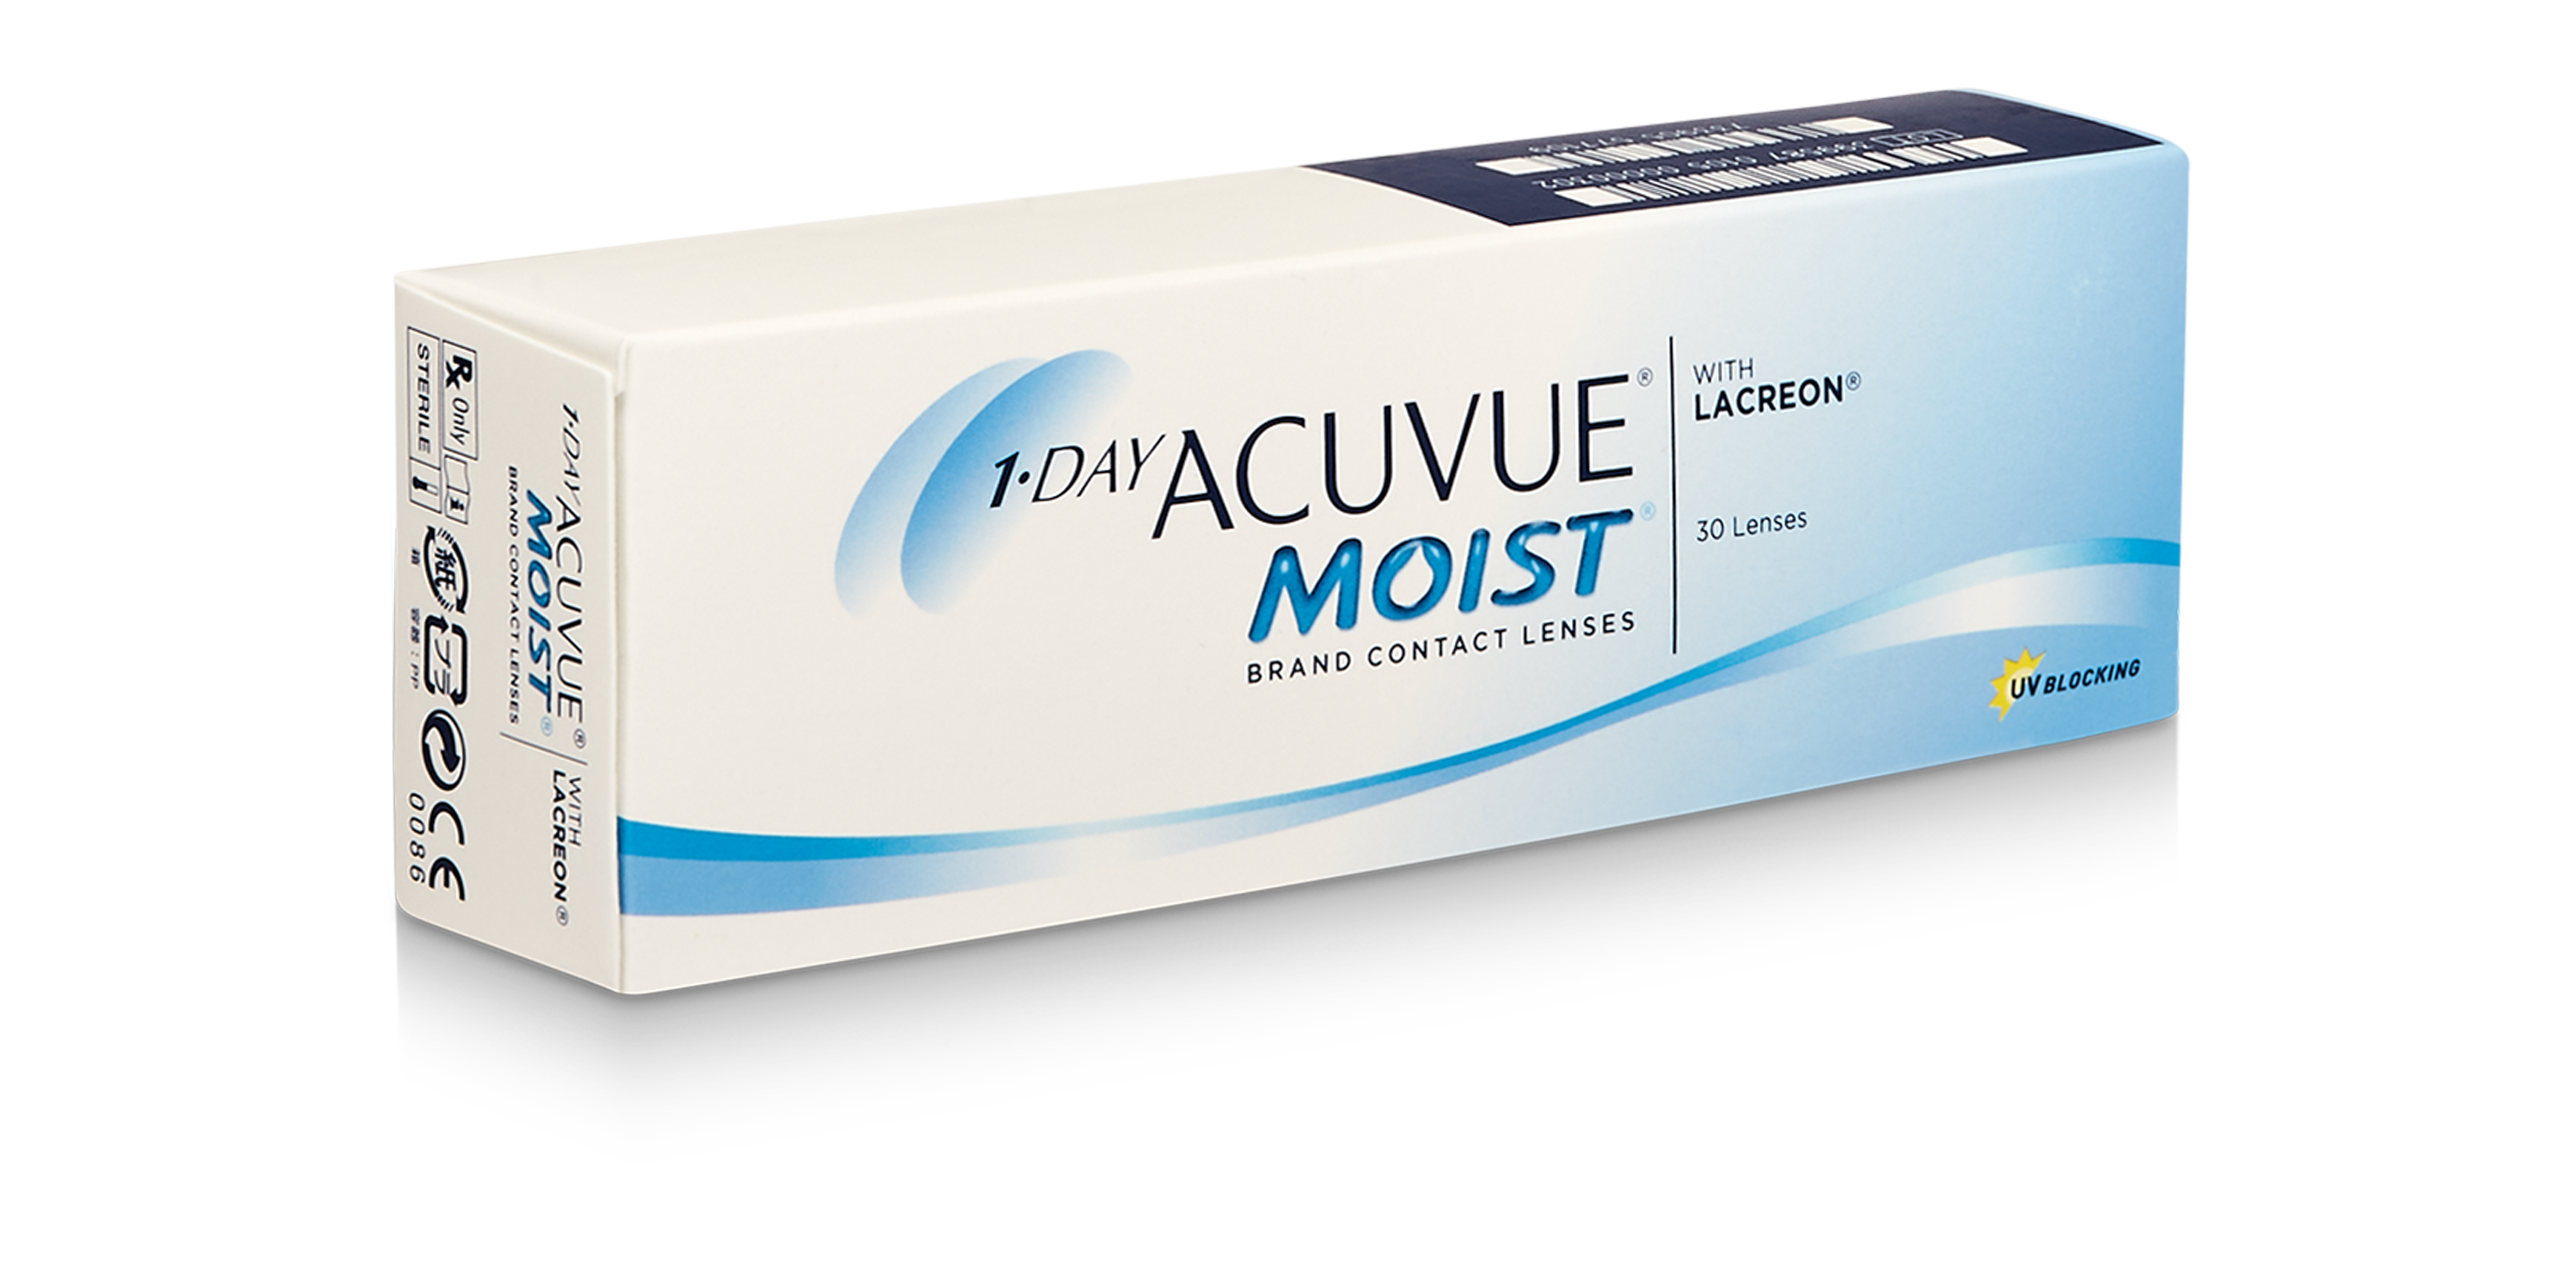 1-DAY ACUVUE® MOIST, 30 pack